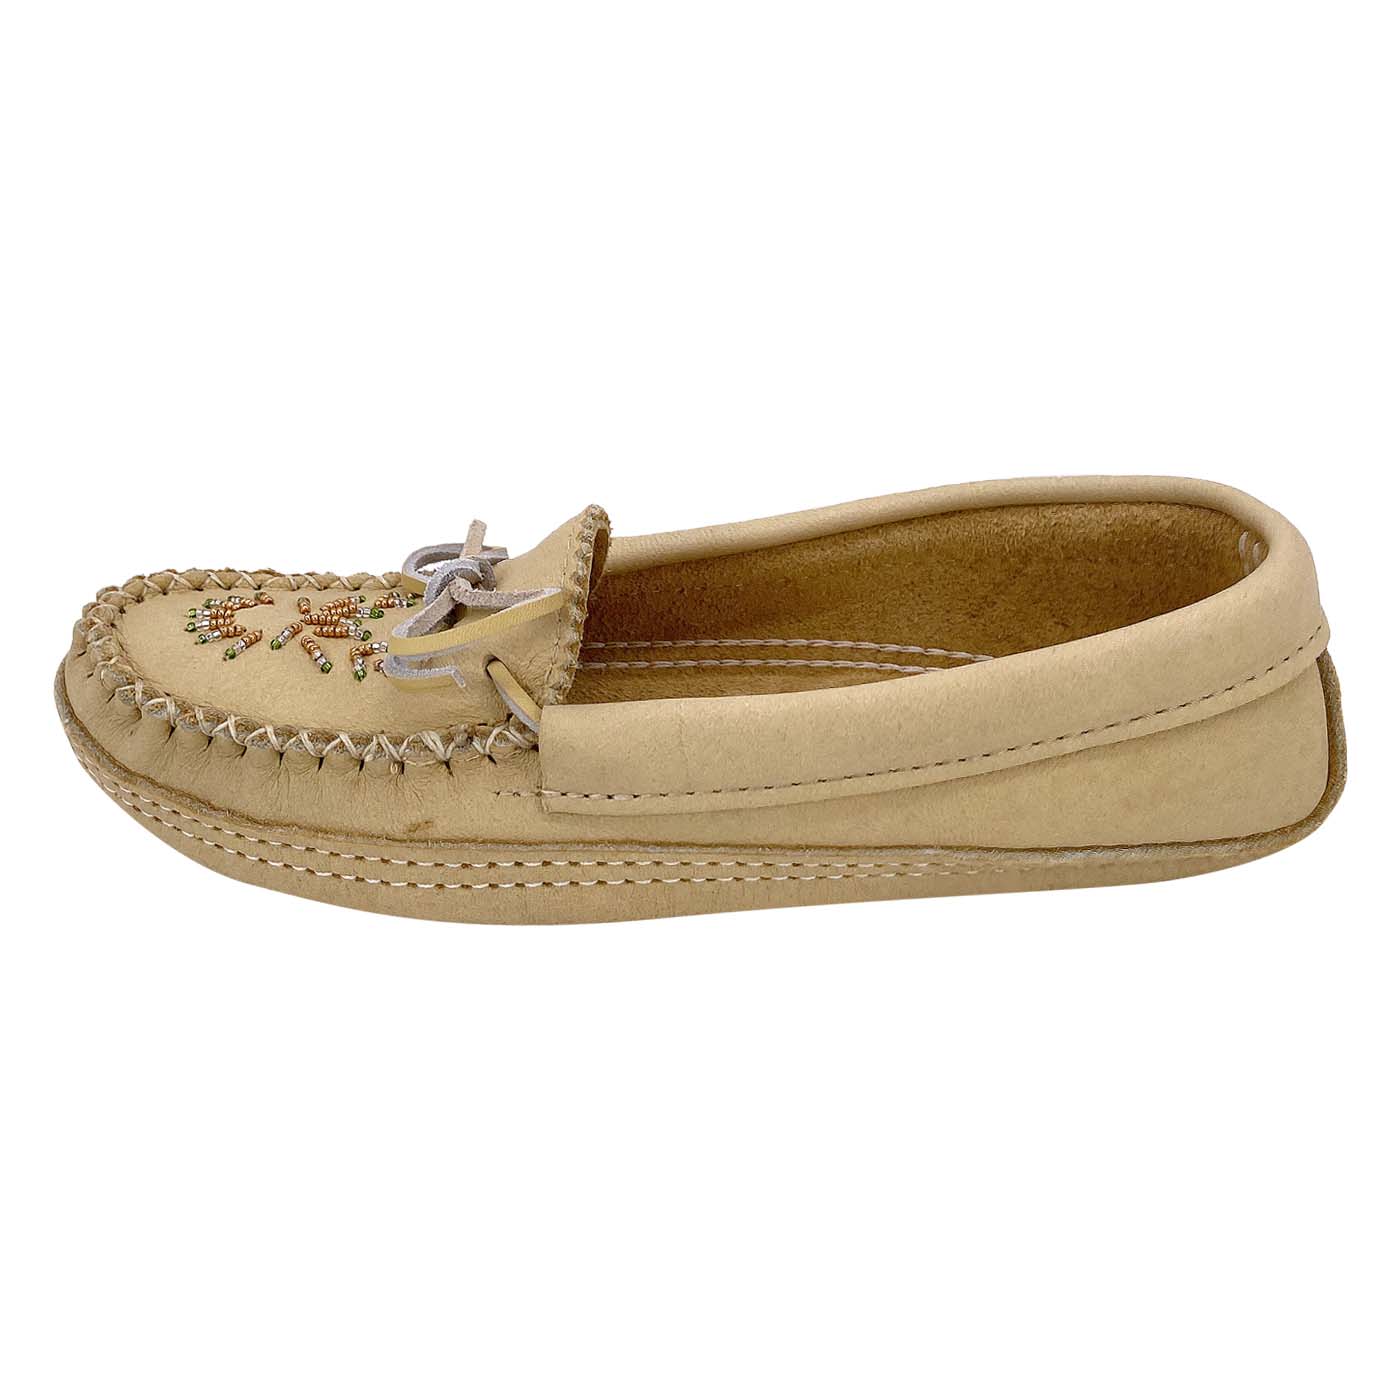 HB ZITA LADIES ITALIAN MOCCASIN  Womens Footwear from WJ French and Son UK